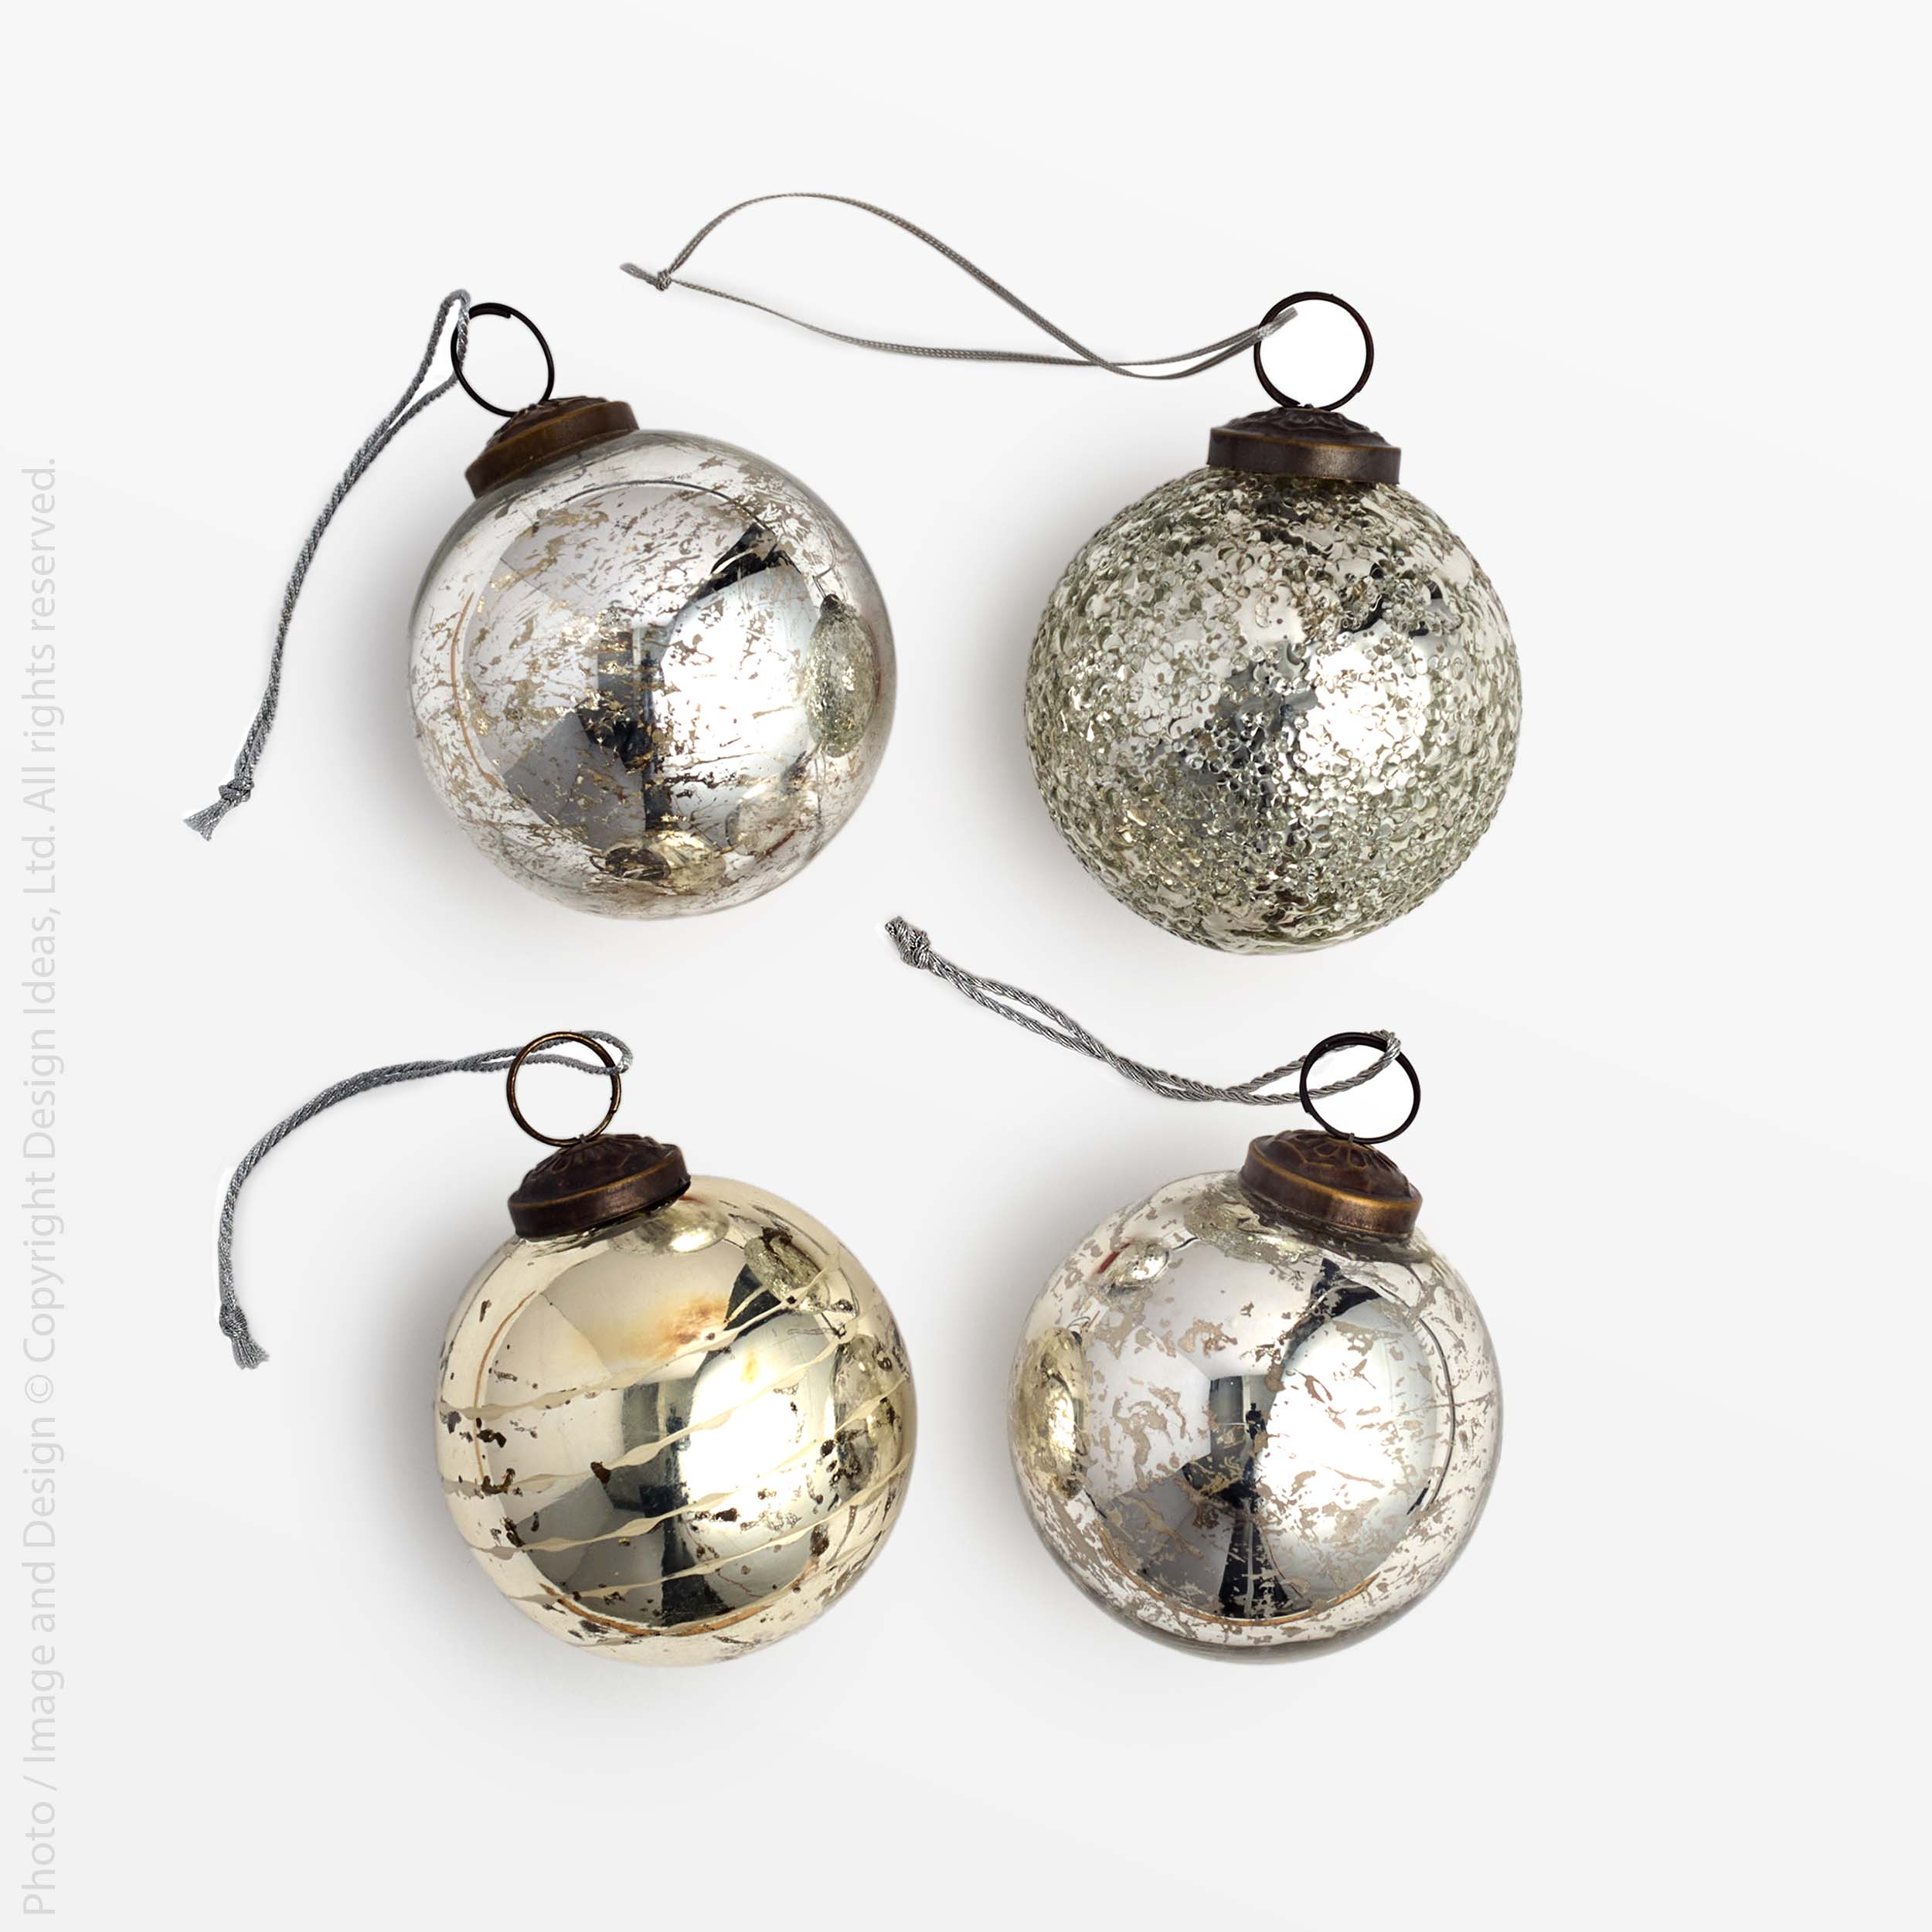 Jensen™ ornaments, 3in, set of 4 - Silver | Image 1 | Premium Ornaments from the Jensen collection | made with Glass for long lasting use | texxture